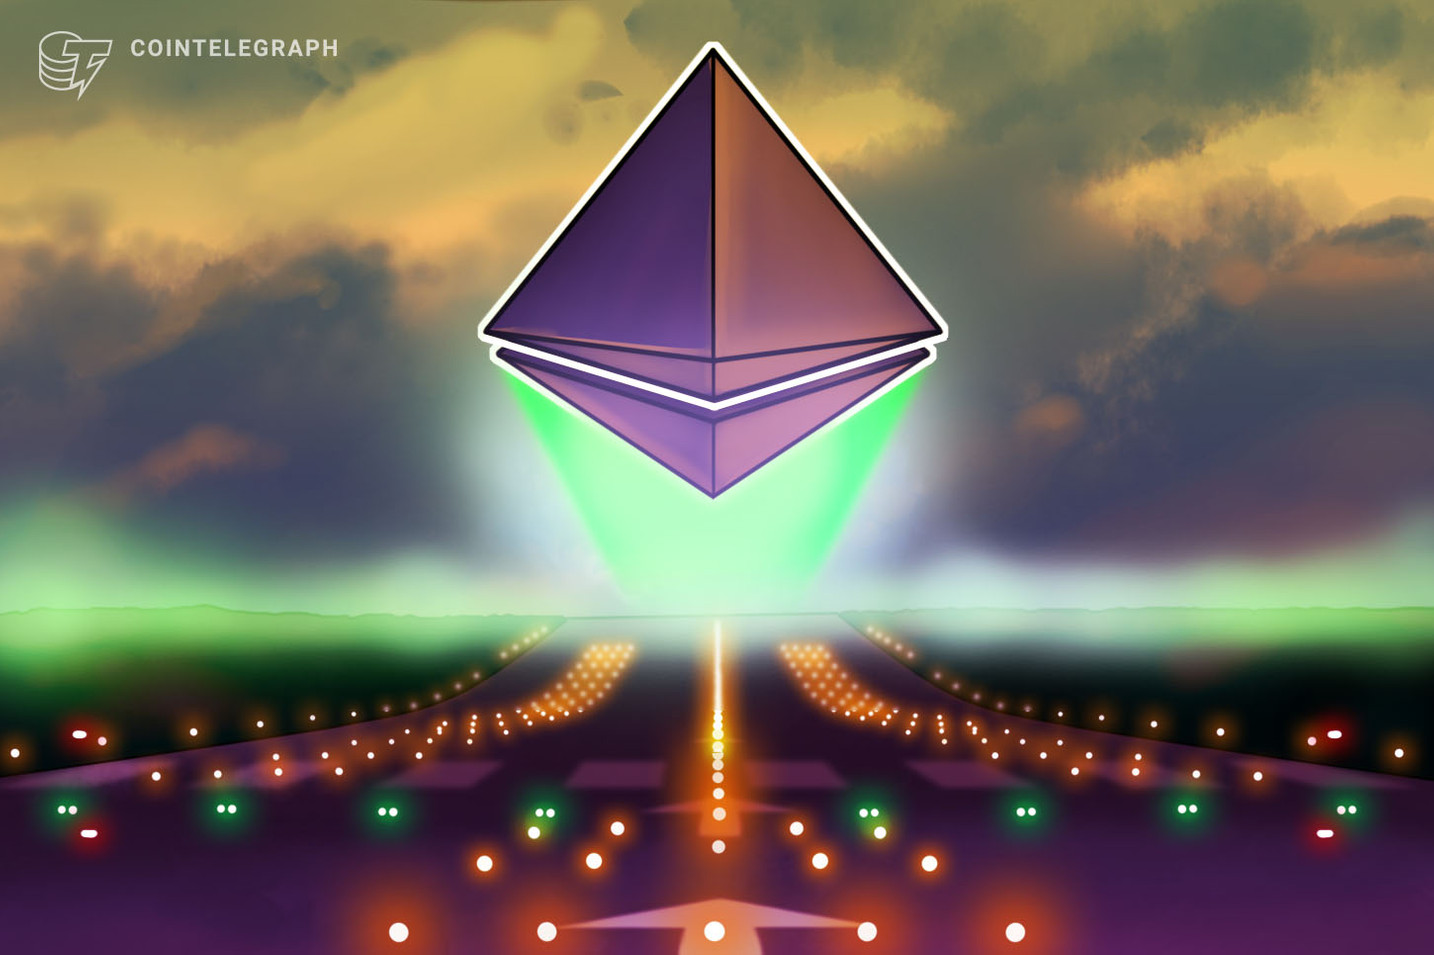 Three Key Factors That Propelled Ethereum to $2,000 For The First Time Ever